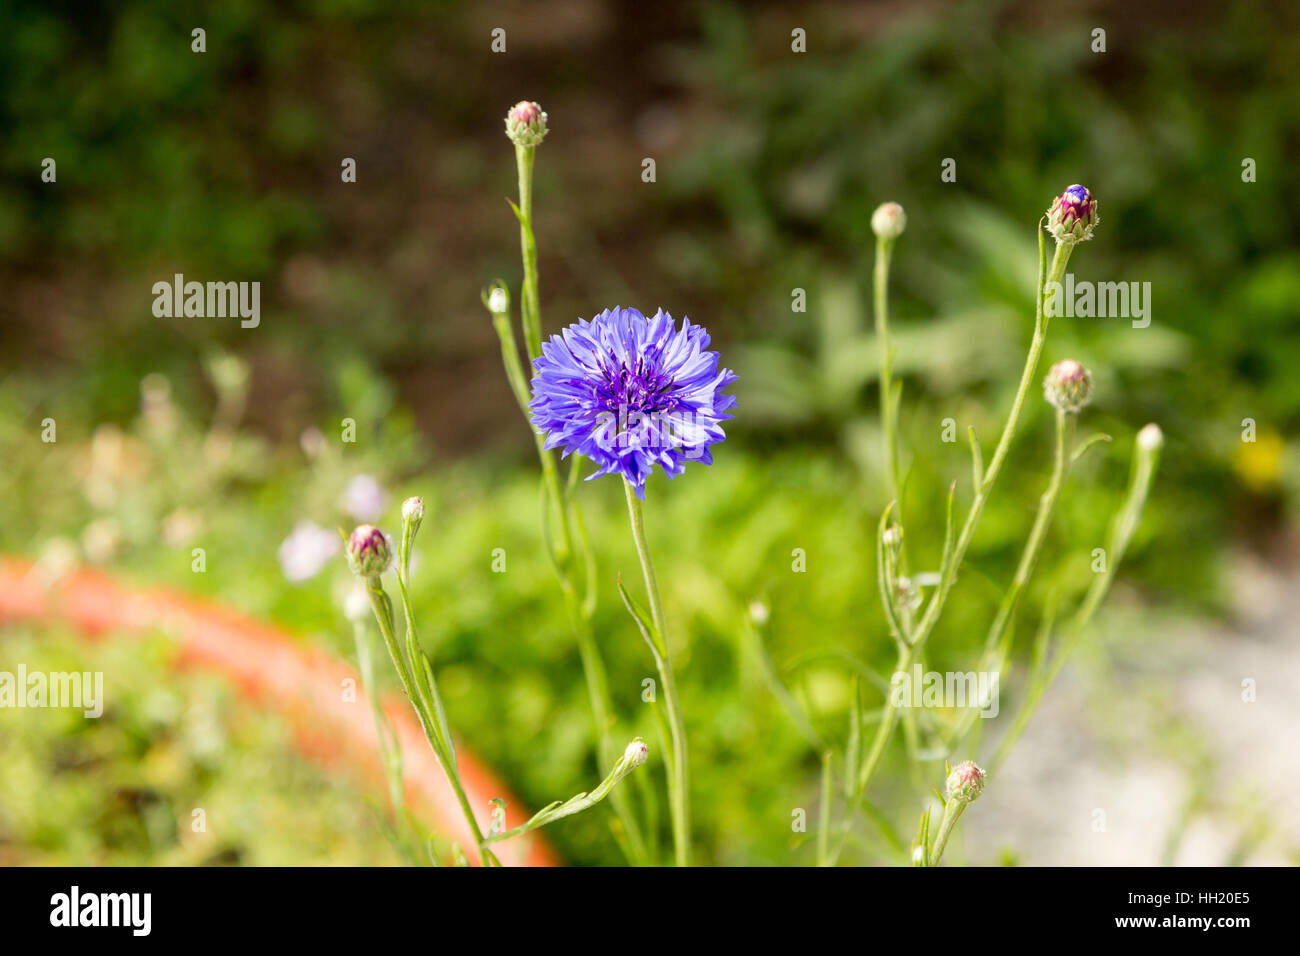 purple cornflower with buds close up on blurred background Stock Photo